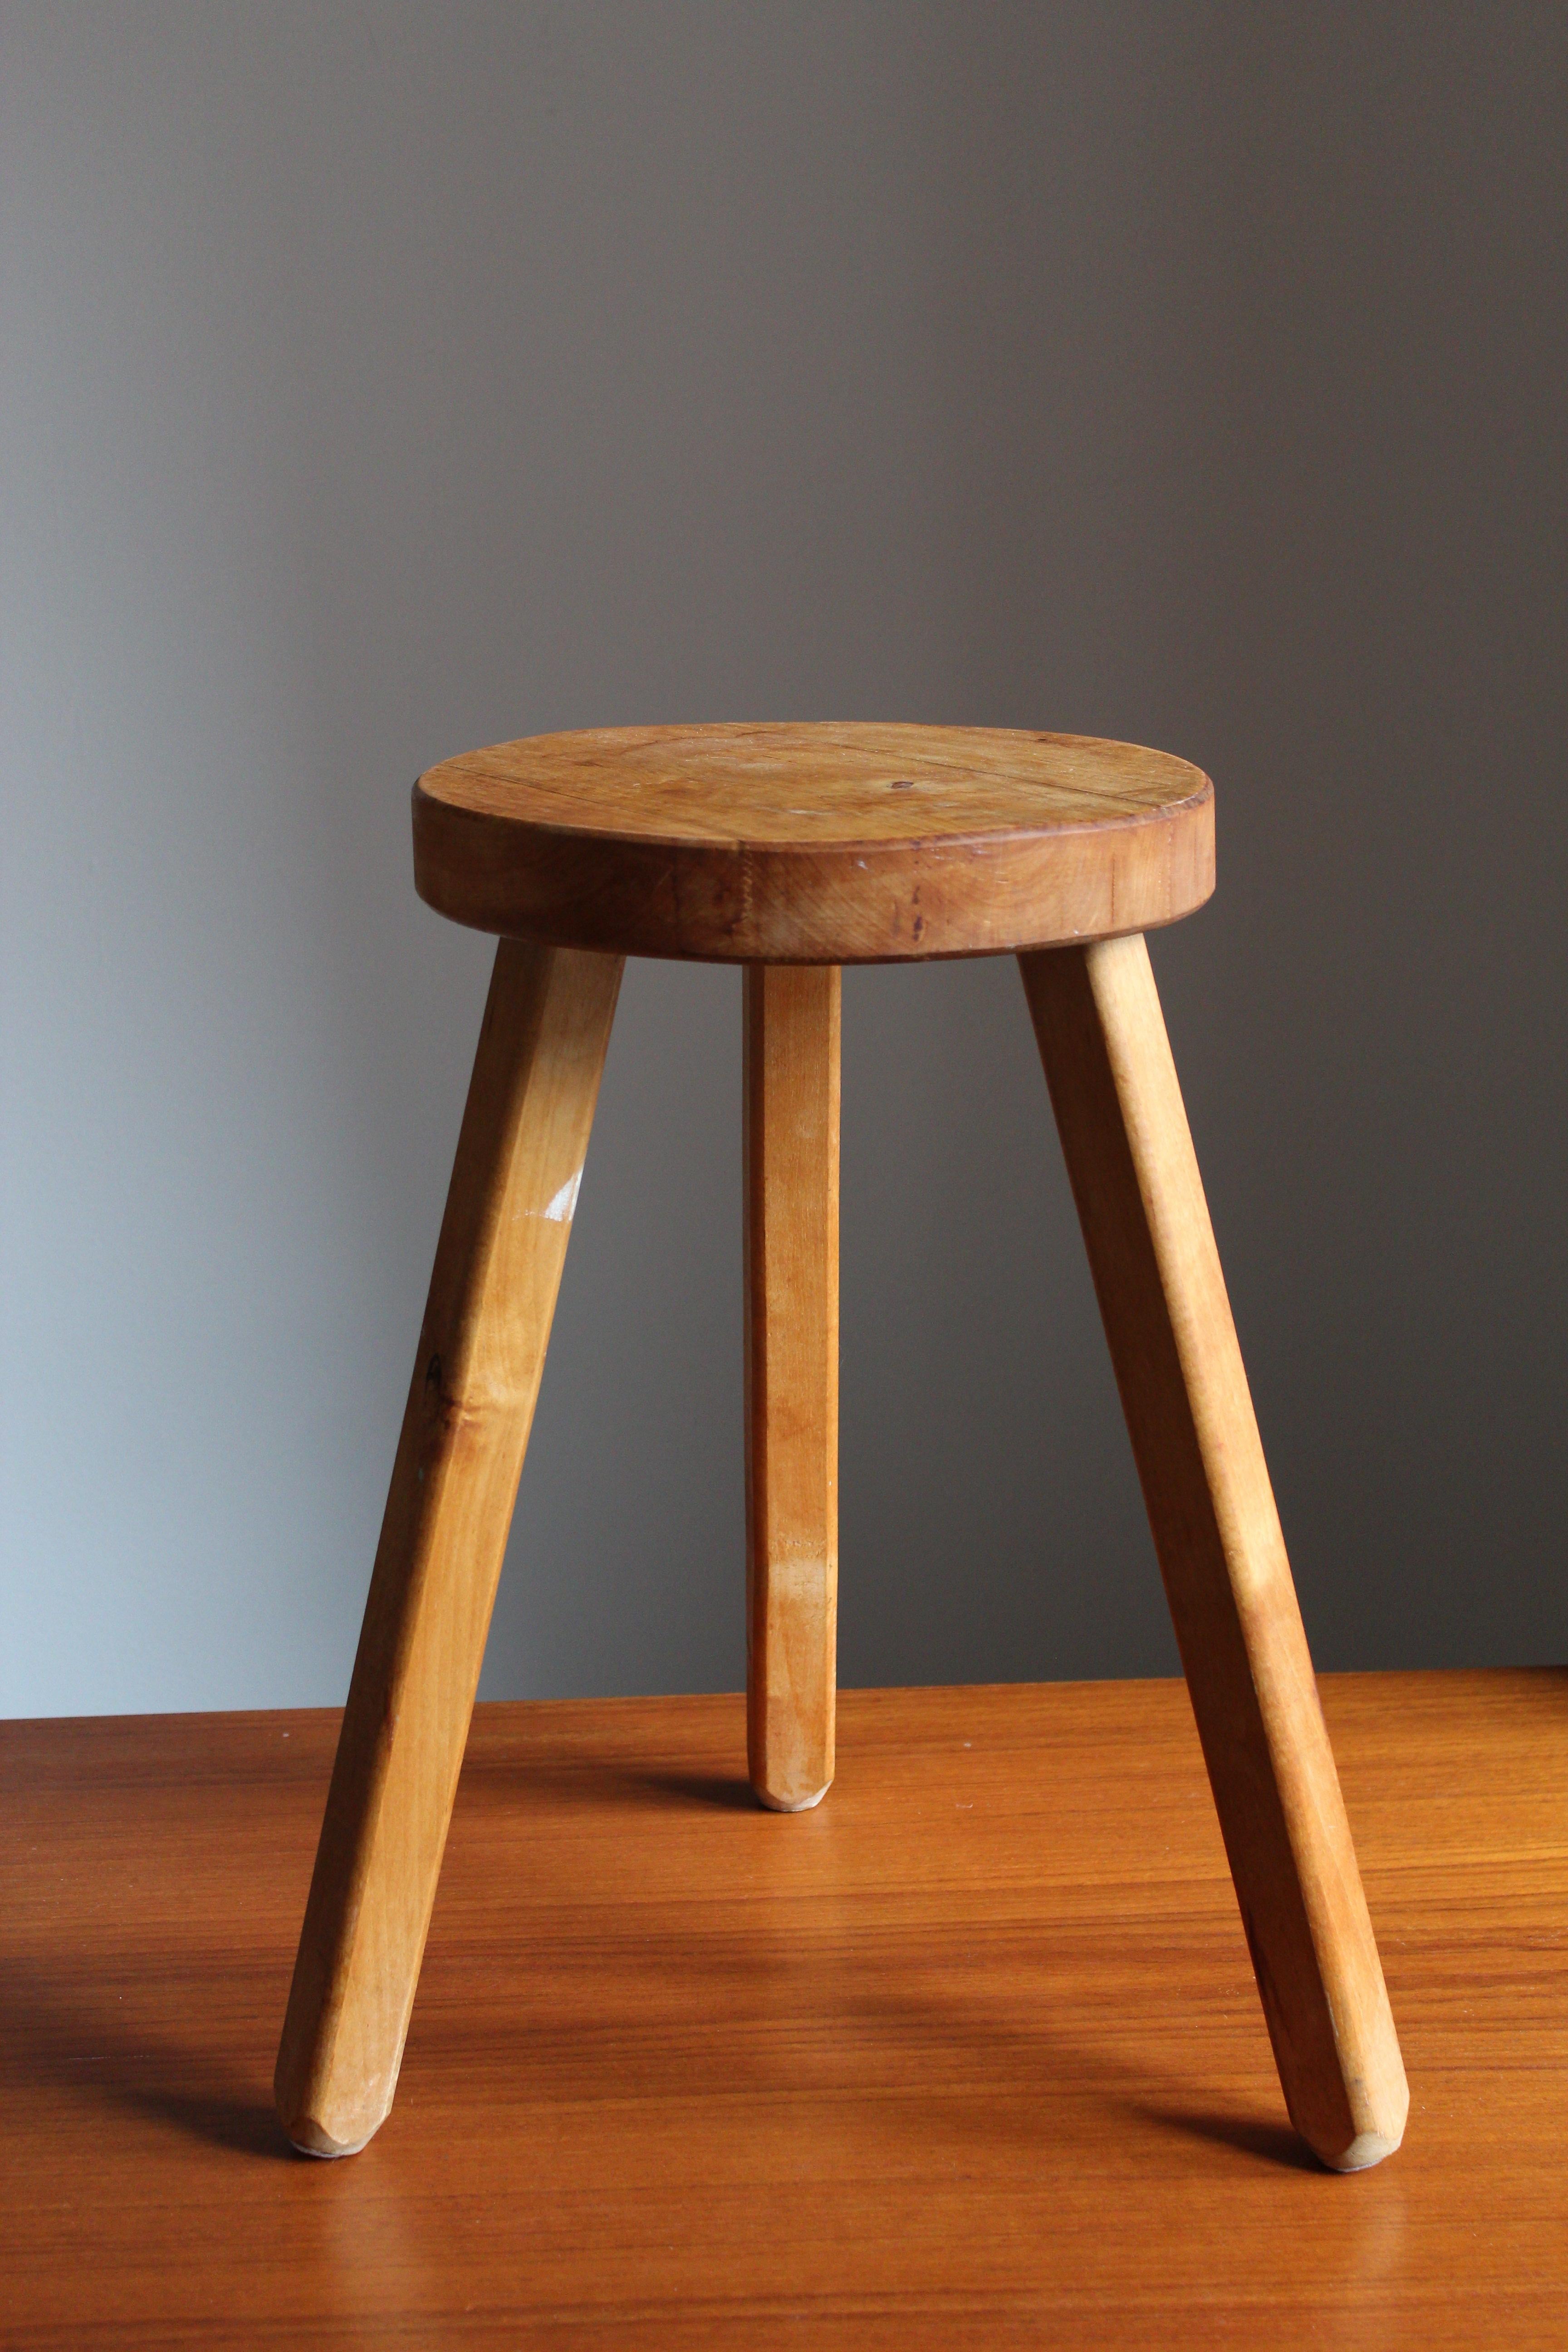 A Swedish wooden stool or side table. By unknown designer, 1970s. 

Other designers working in similar style and materials include Axel Einar Hjorth, Roland Wilhelmsson, Pierre Chapo, and Charlotte Perriand. 




